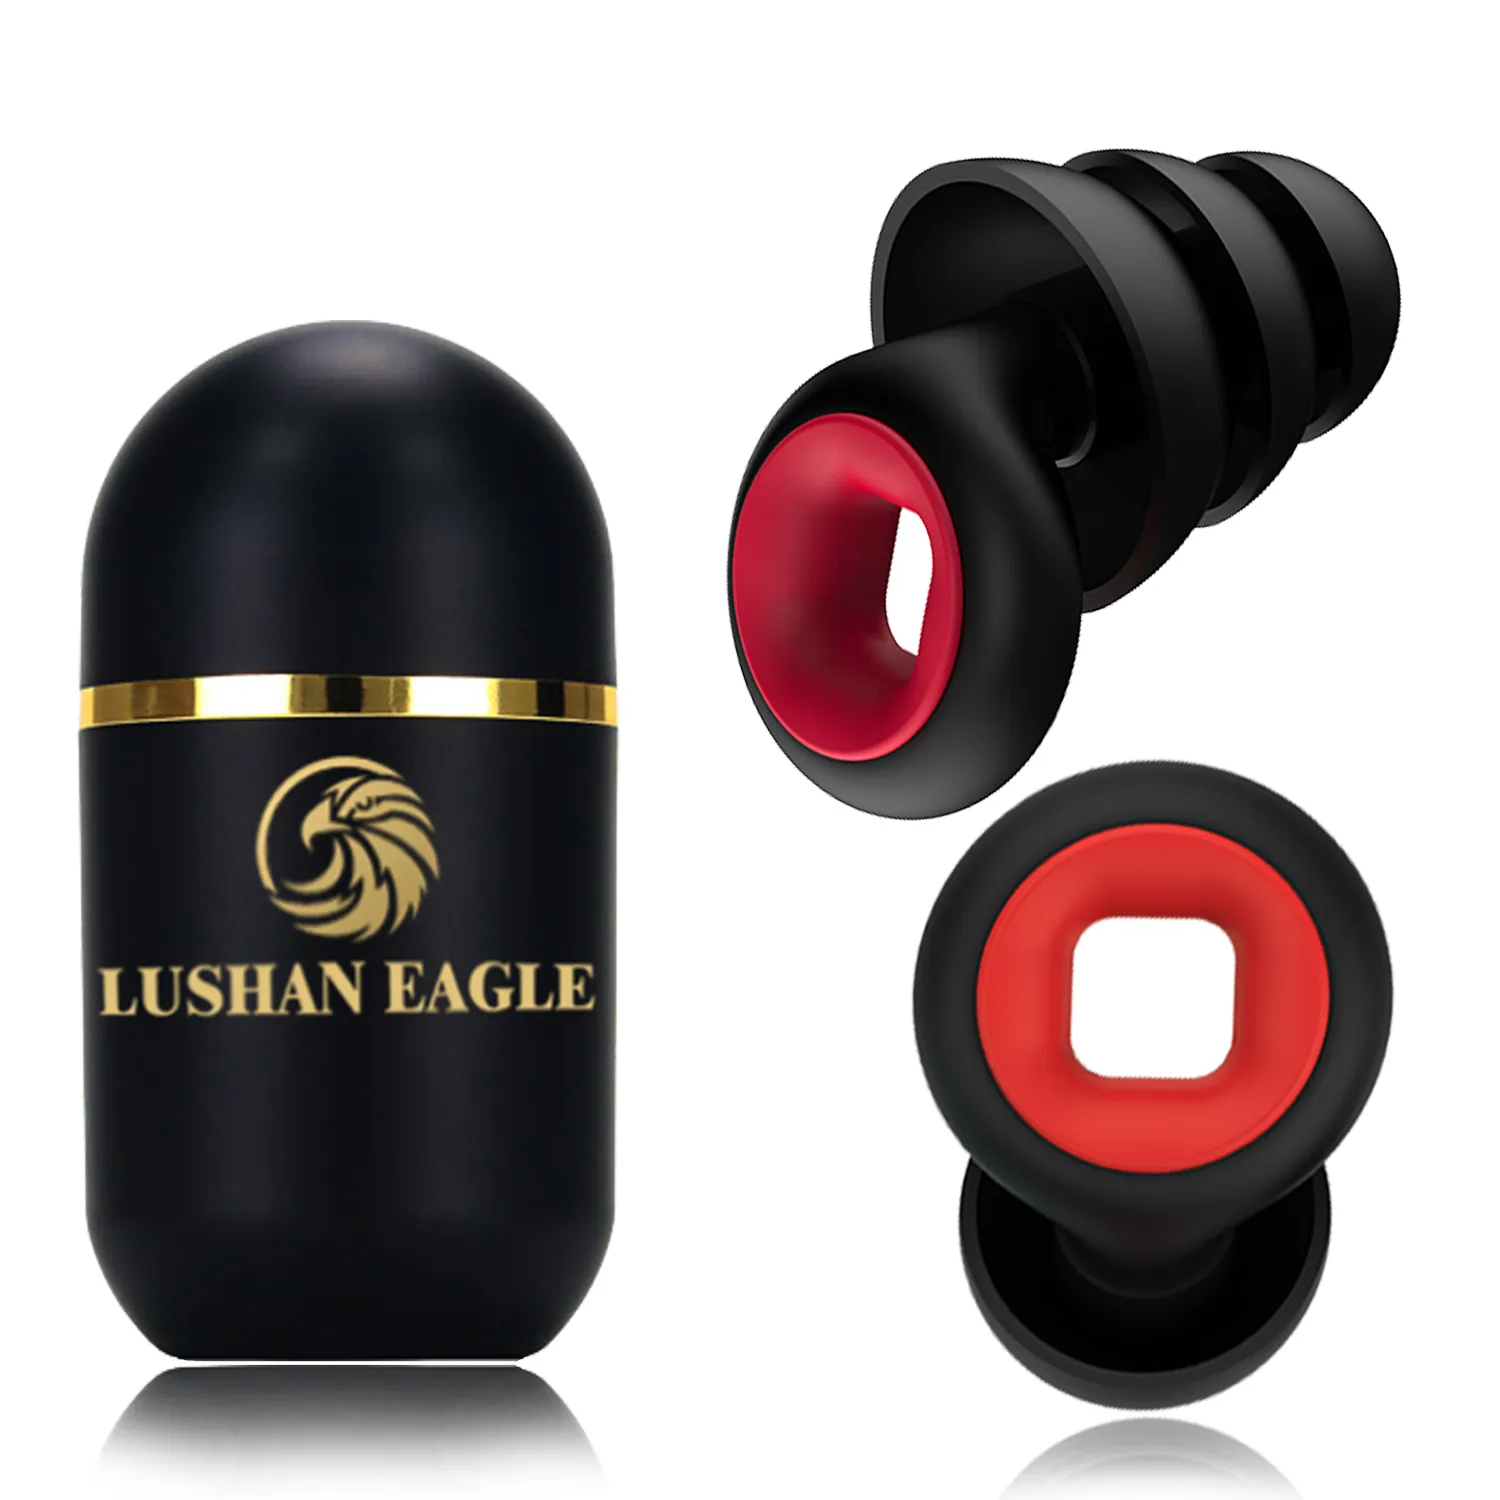 Lushan Eagle Earplugs Sound Sound Blocking Soft Reusable Recosion Noise Noise ear Plags for Sleeping、Work、Flying、Concert、DJ、Bar、Office